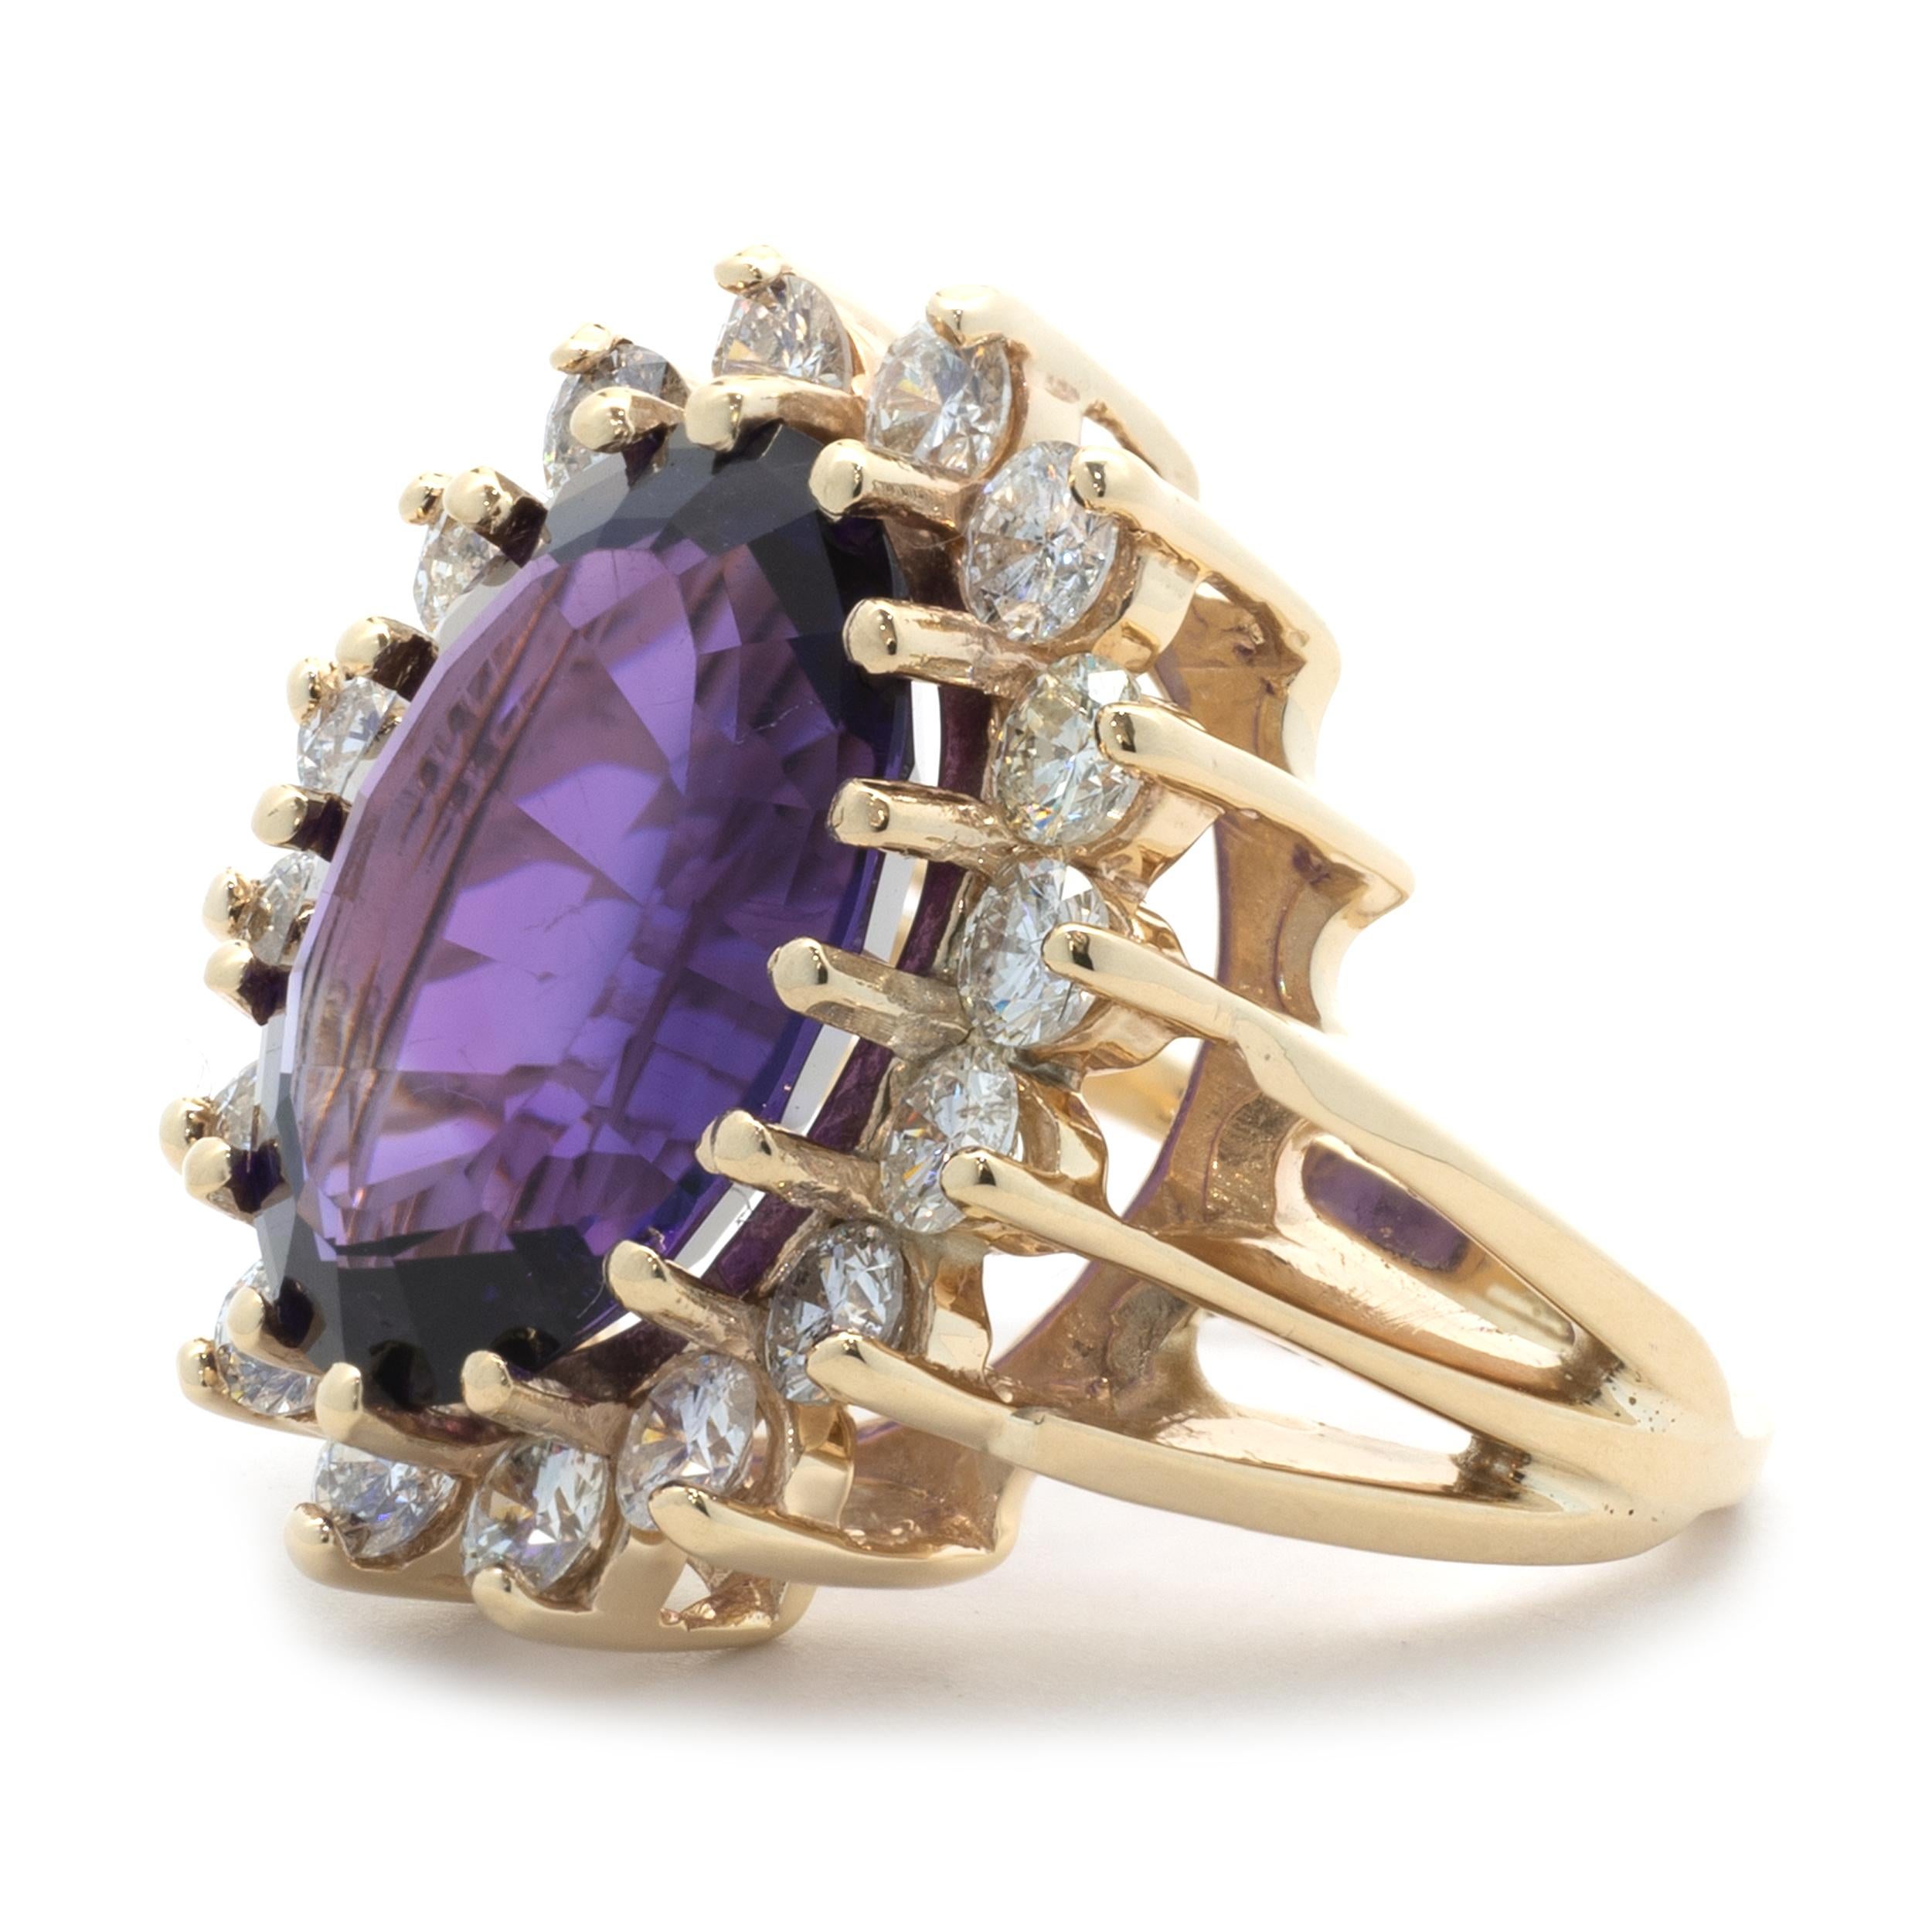 Designer: custom design
Material: 14k yellow gold
Amethyst: 1 oval cut = 9.75ct
Diamond: 16 round brilliant cut = .96cttw
Color: I
Clarity: SI1-2
Ring size: 5.5 (please allow two additional shipping days for sizing requests) 
Dimension: ring top